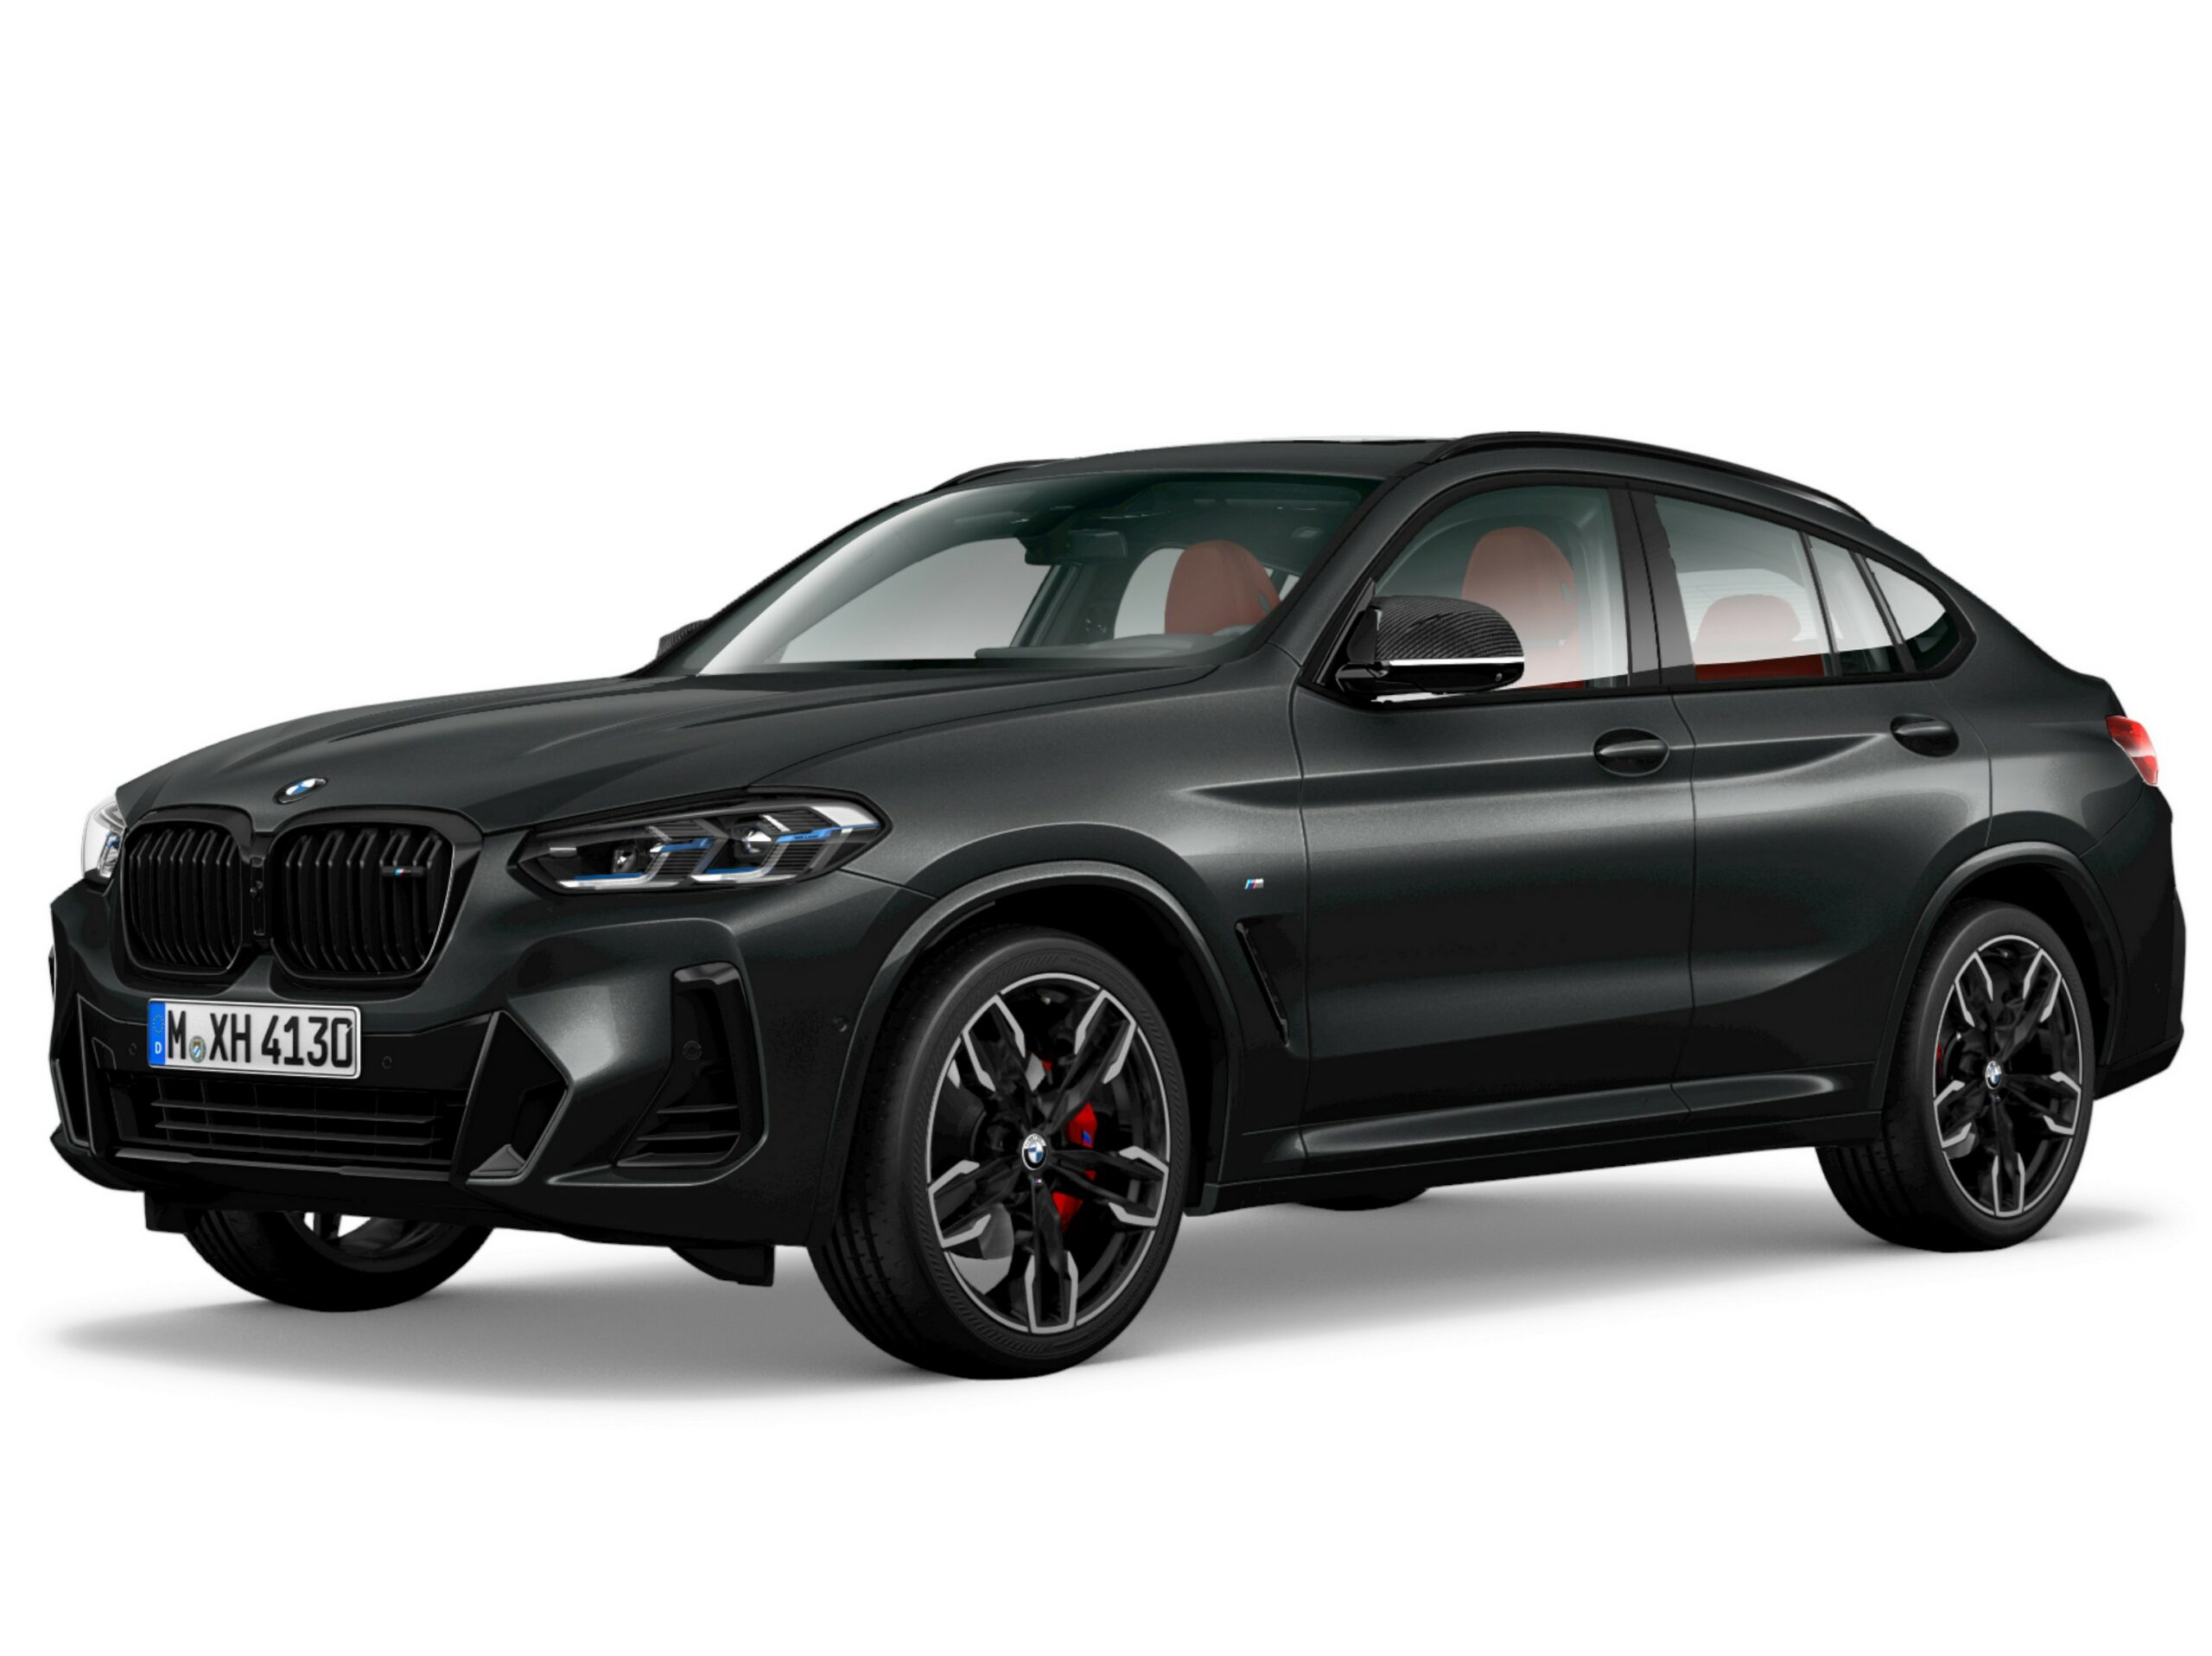 BMW X4 M40i M Sport Edition Debuts With Matte Individual Paint